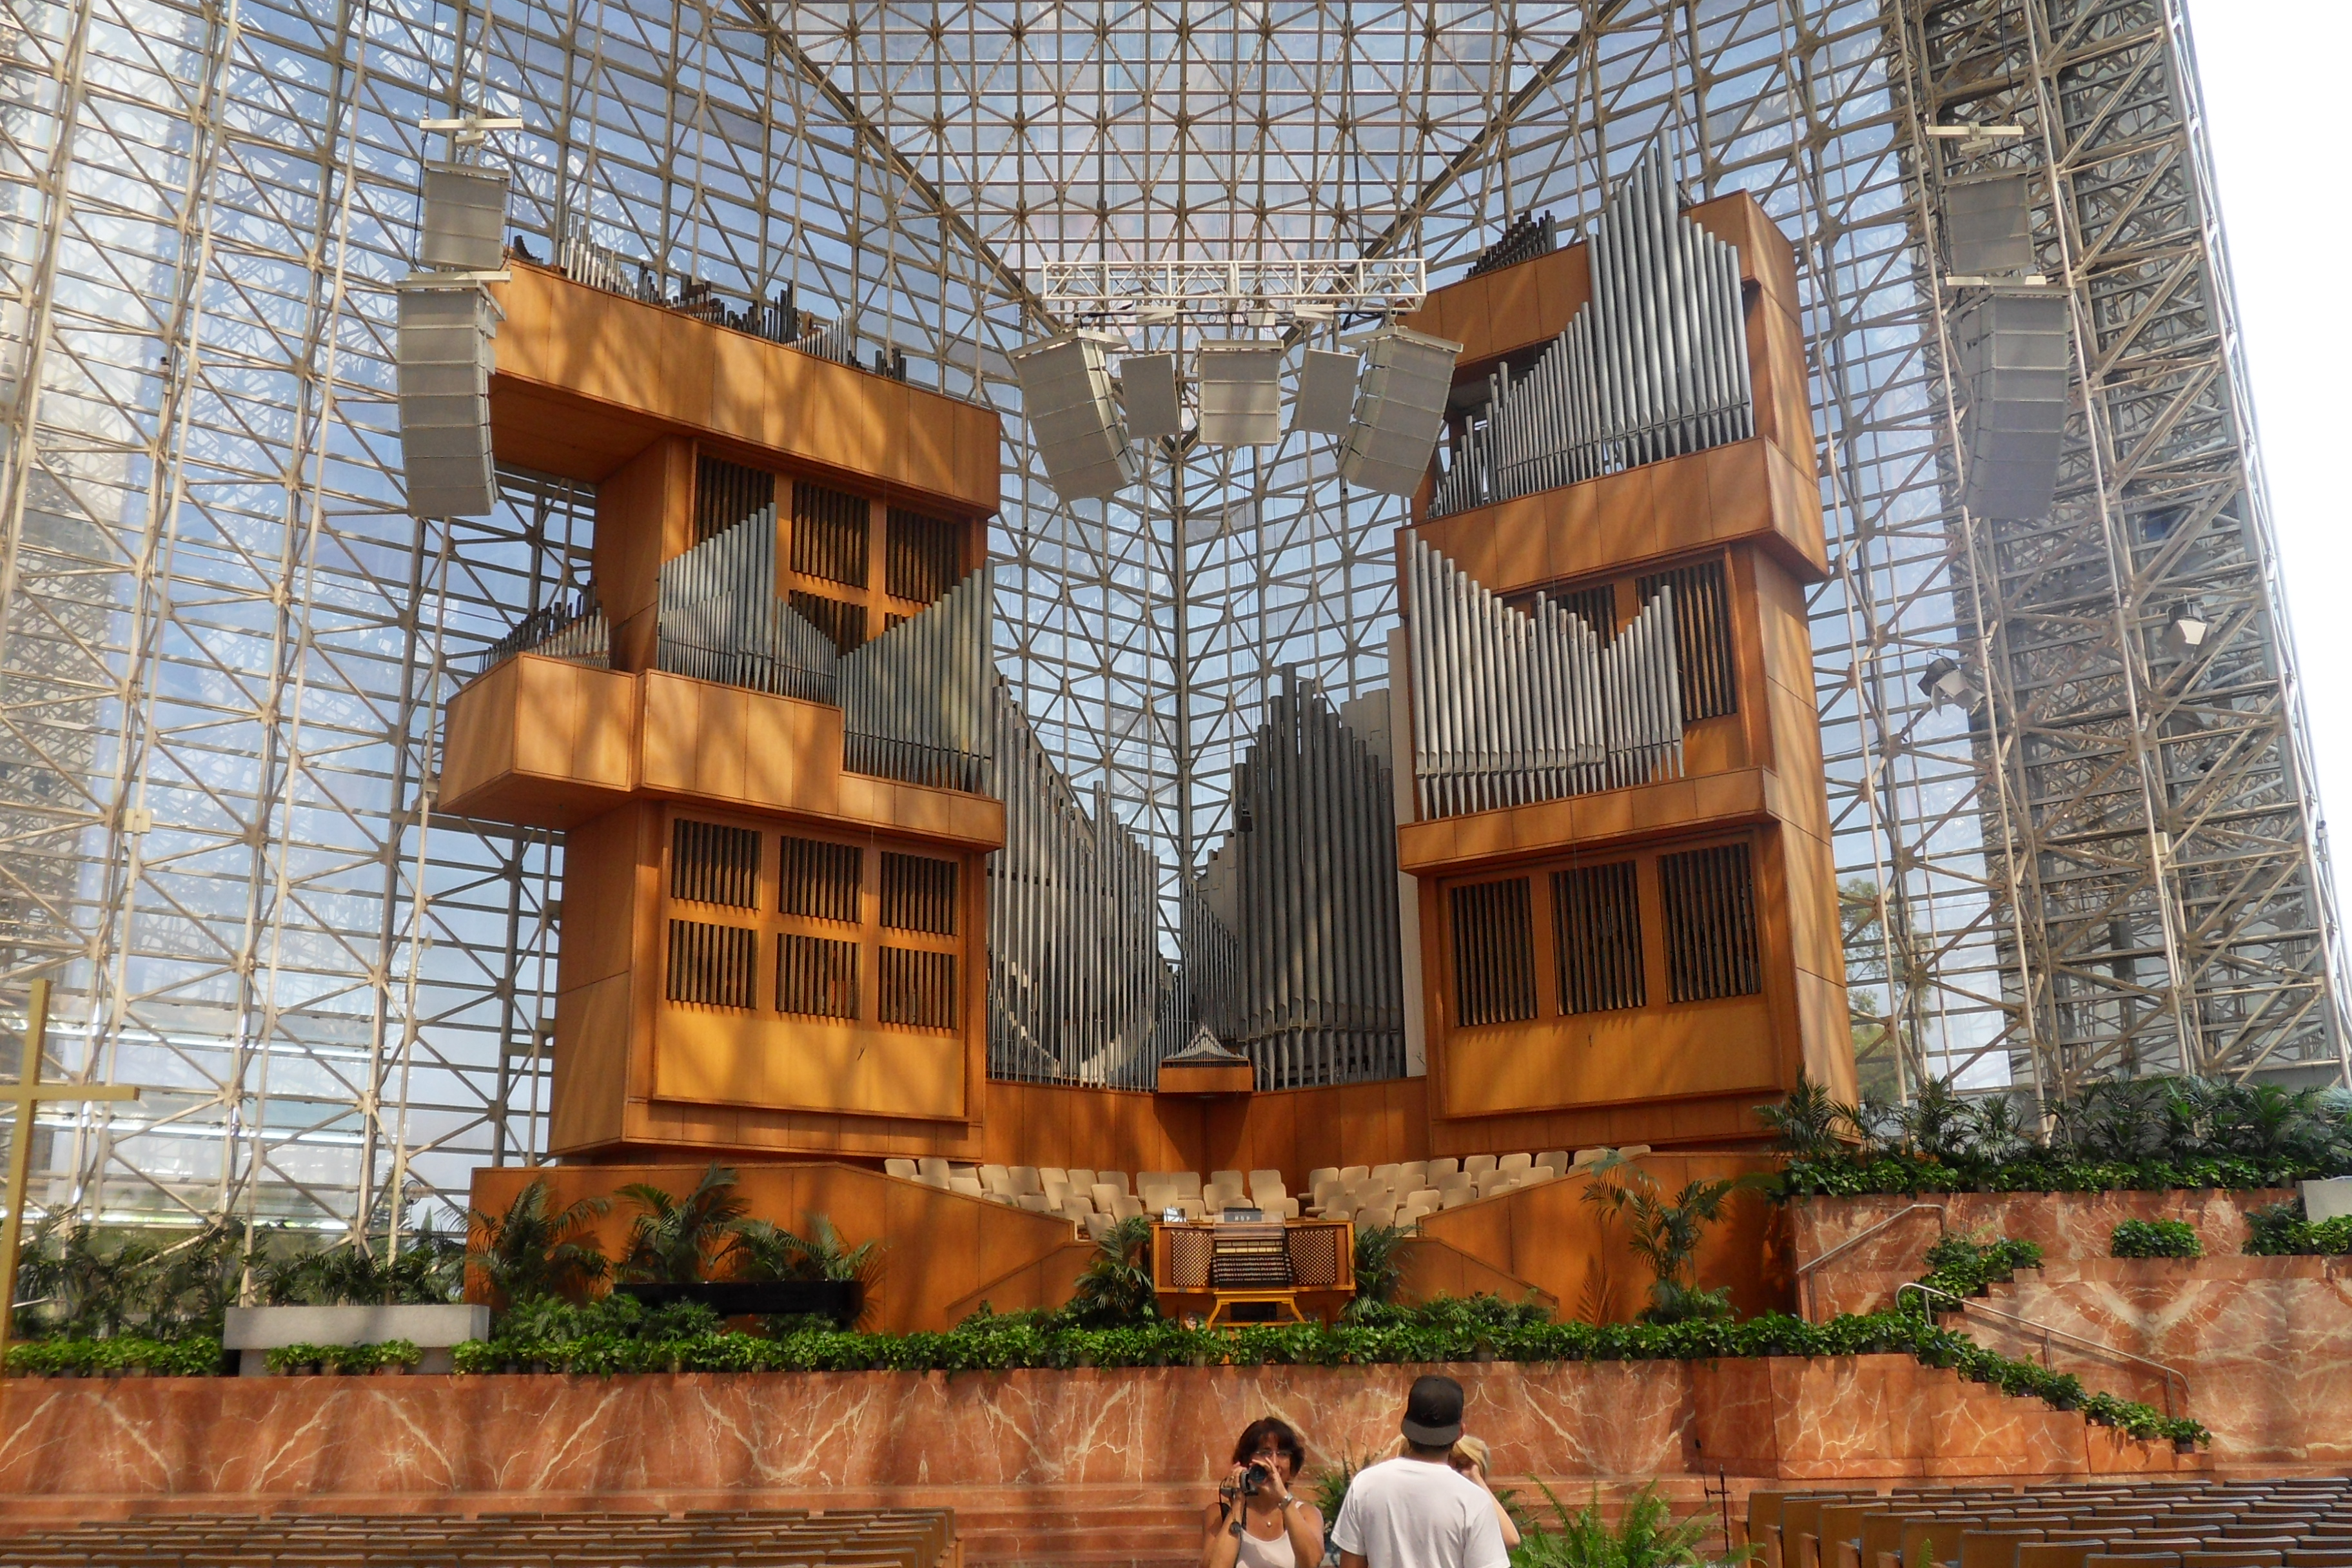 The Crystal Cathedral in California, USA